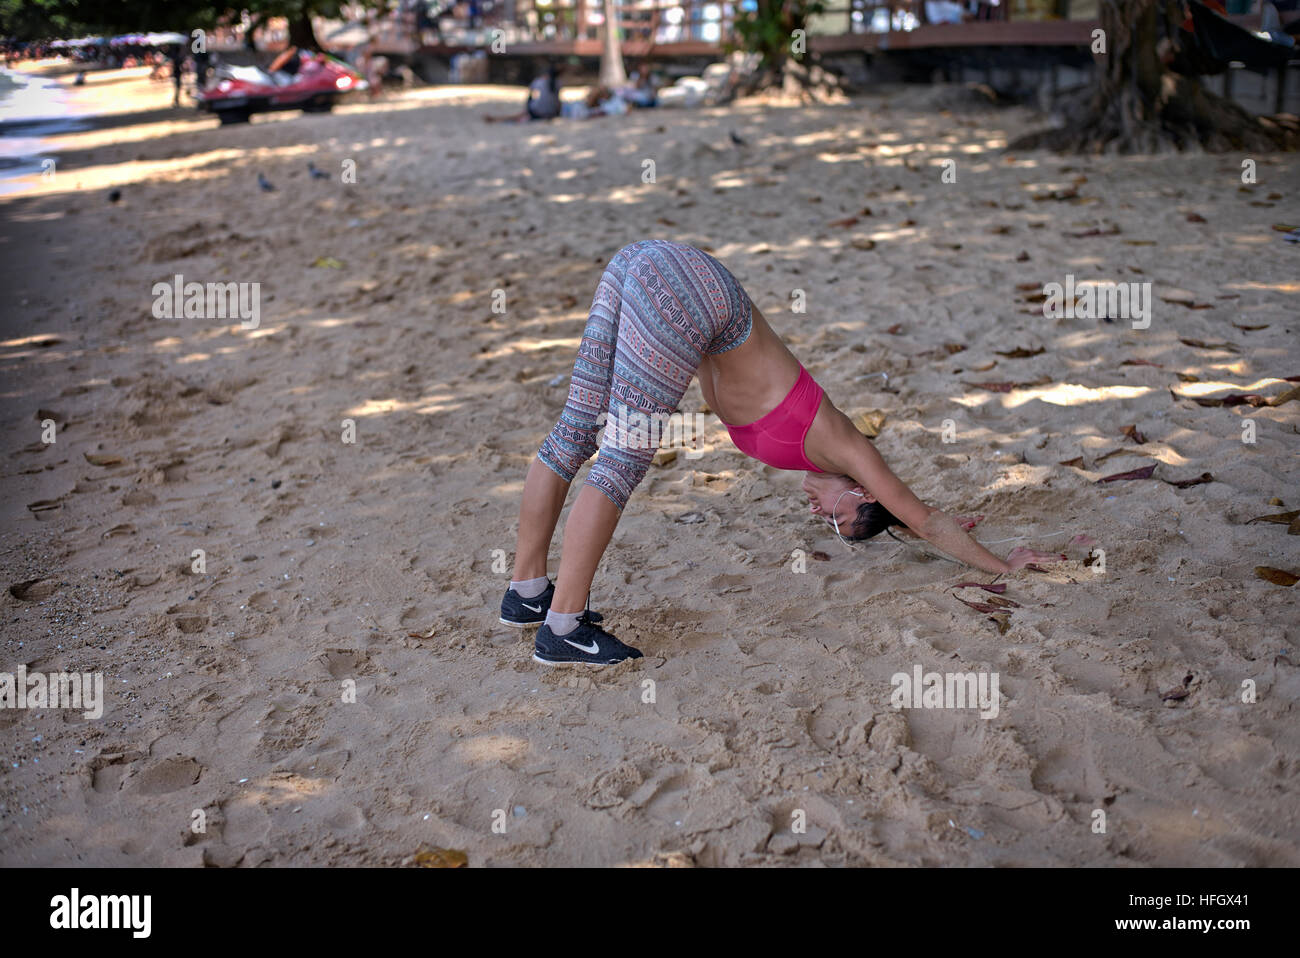 Woman beach exercise. Female keep fit exercising and working out on the beach at Pattaya Thailand S. E. Asia Stock Photo